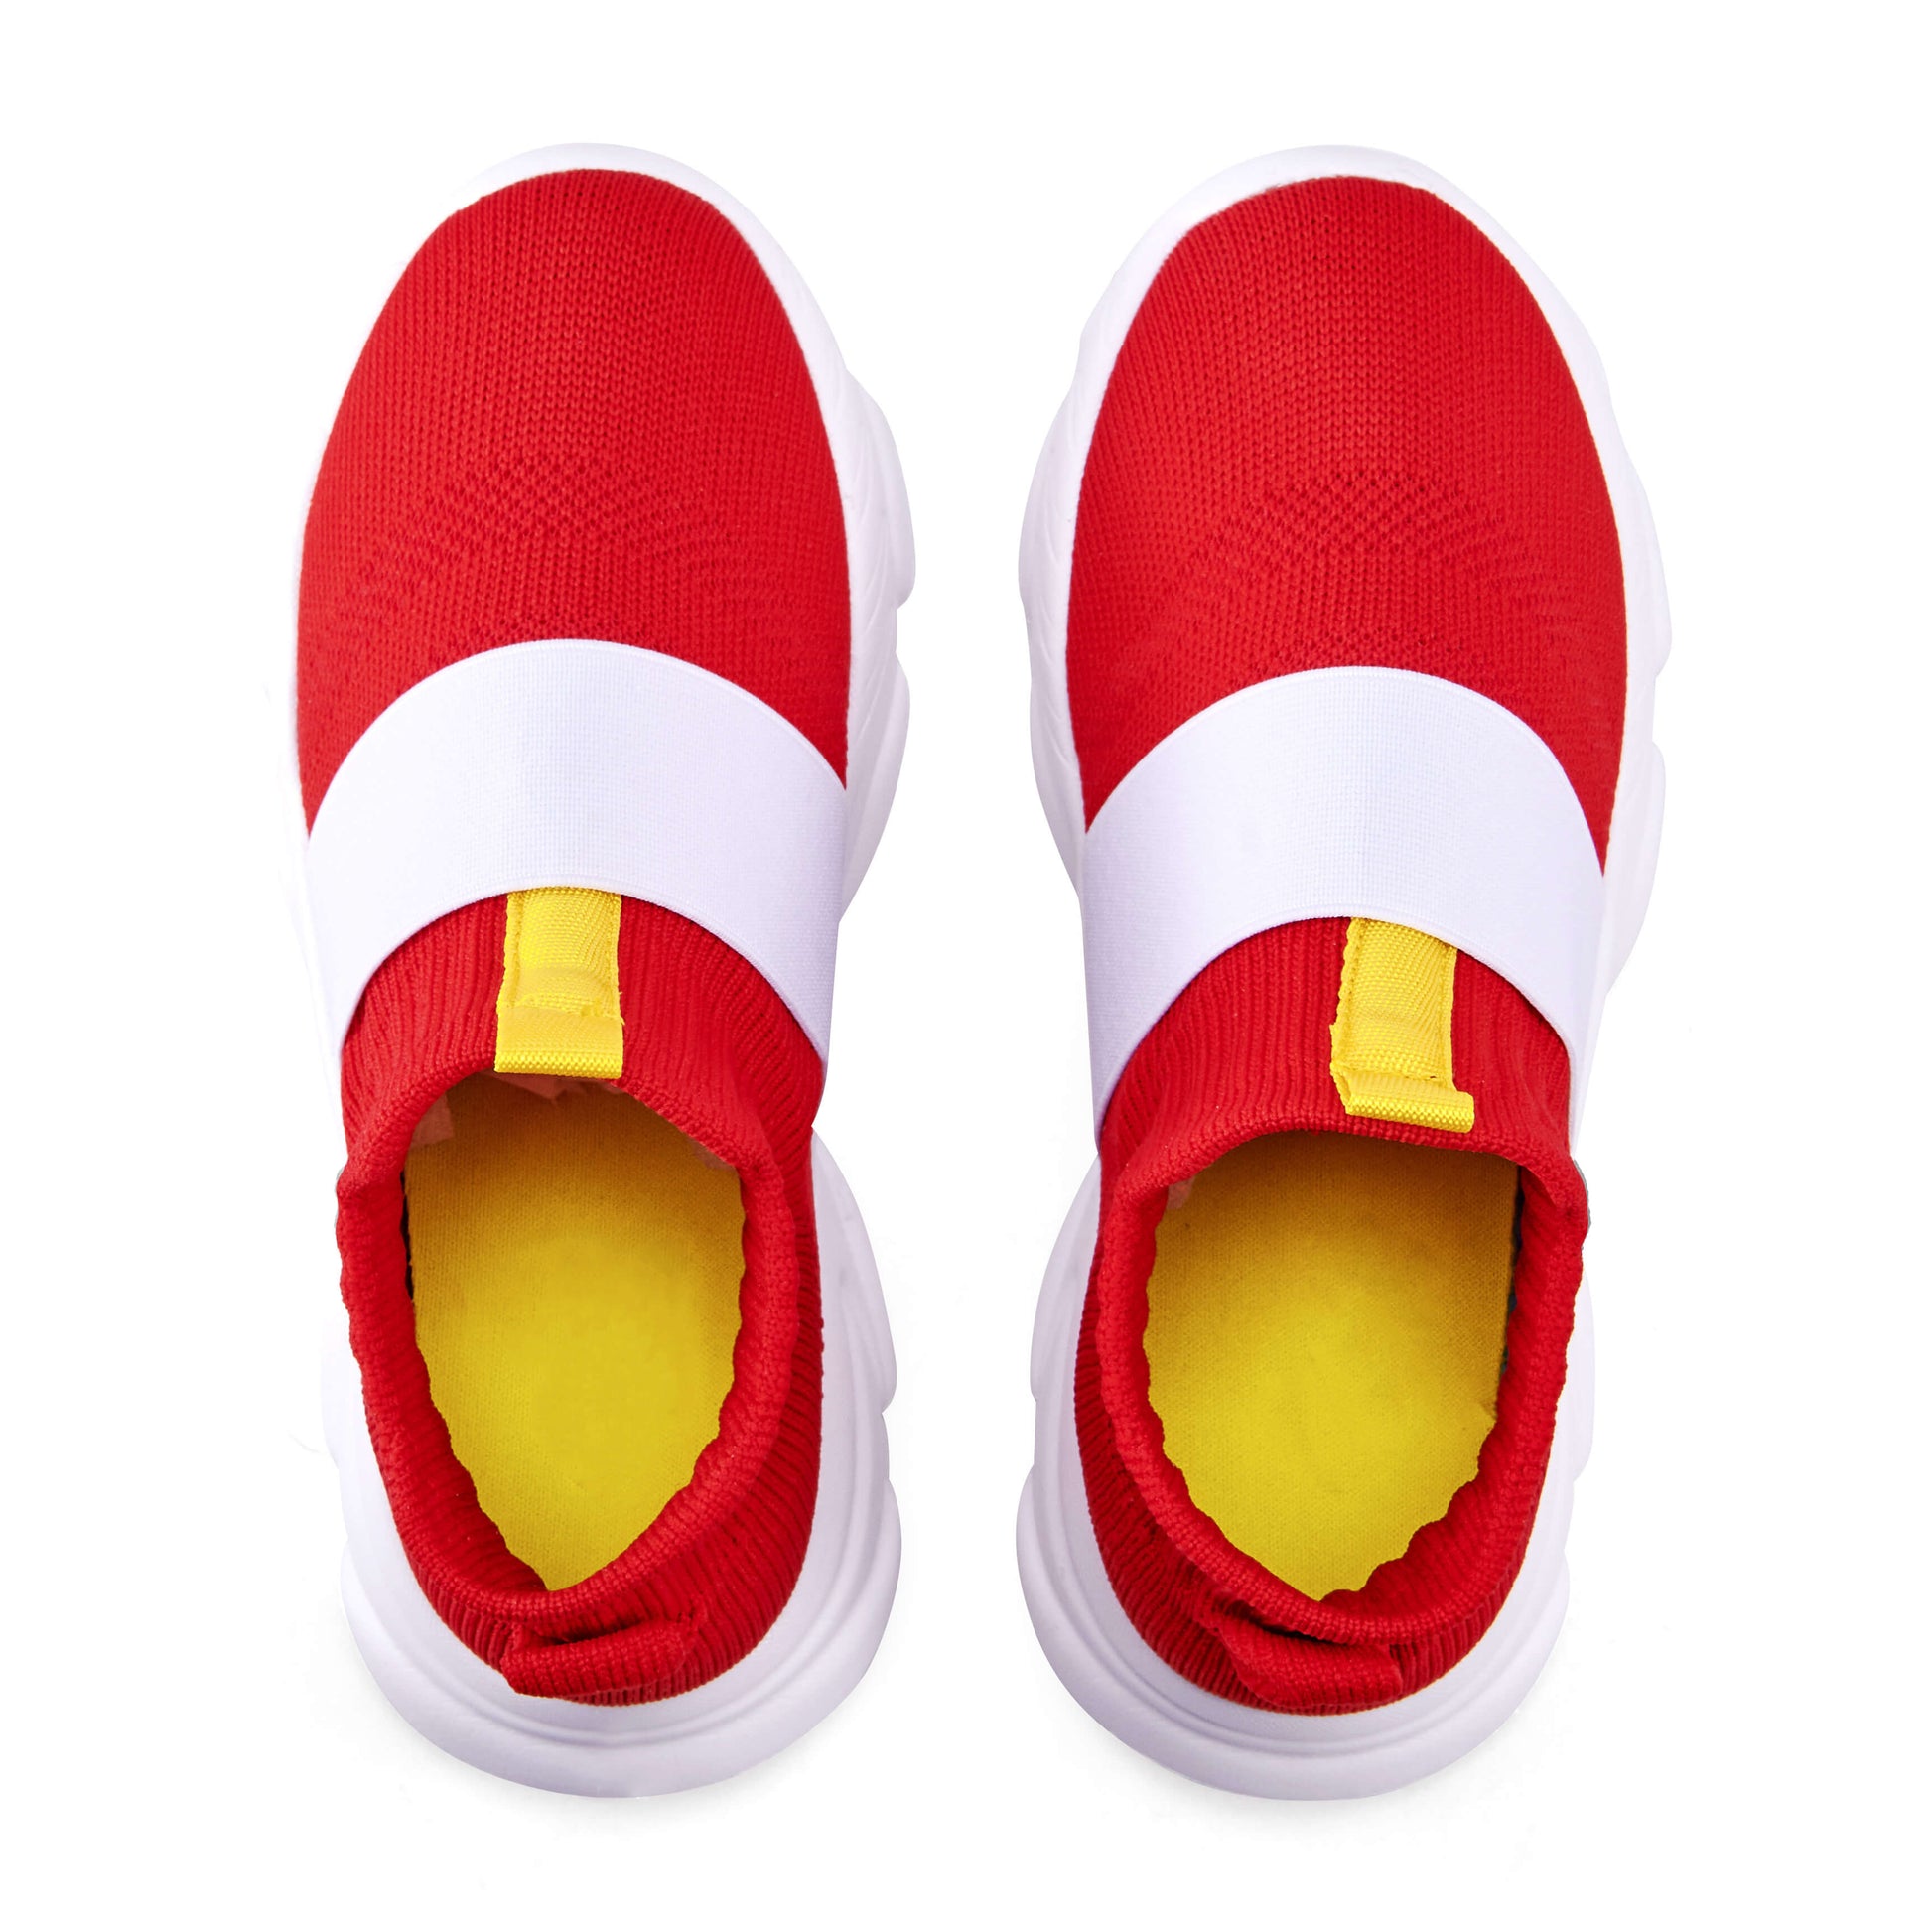 sonic shoes for boys